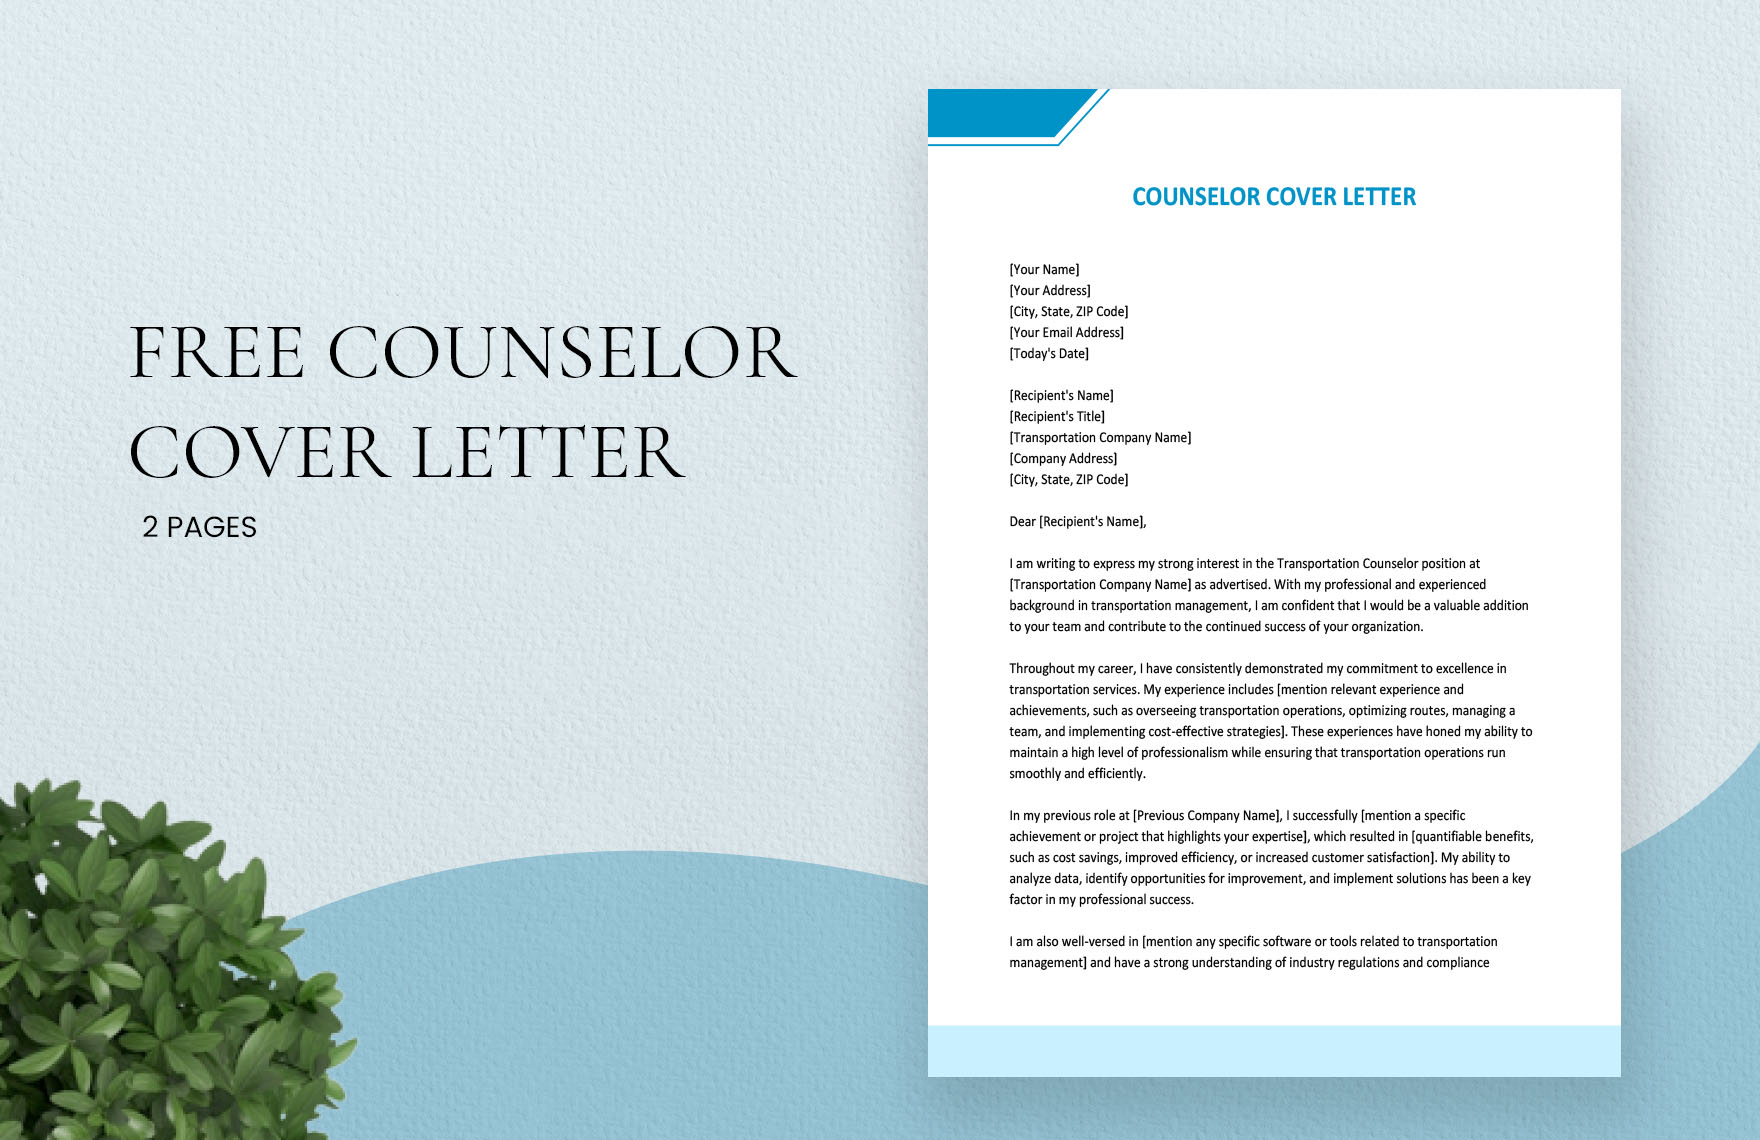 Free Counselor Cover Letter